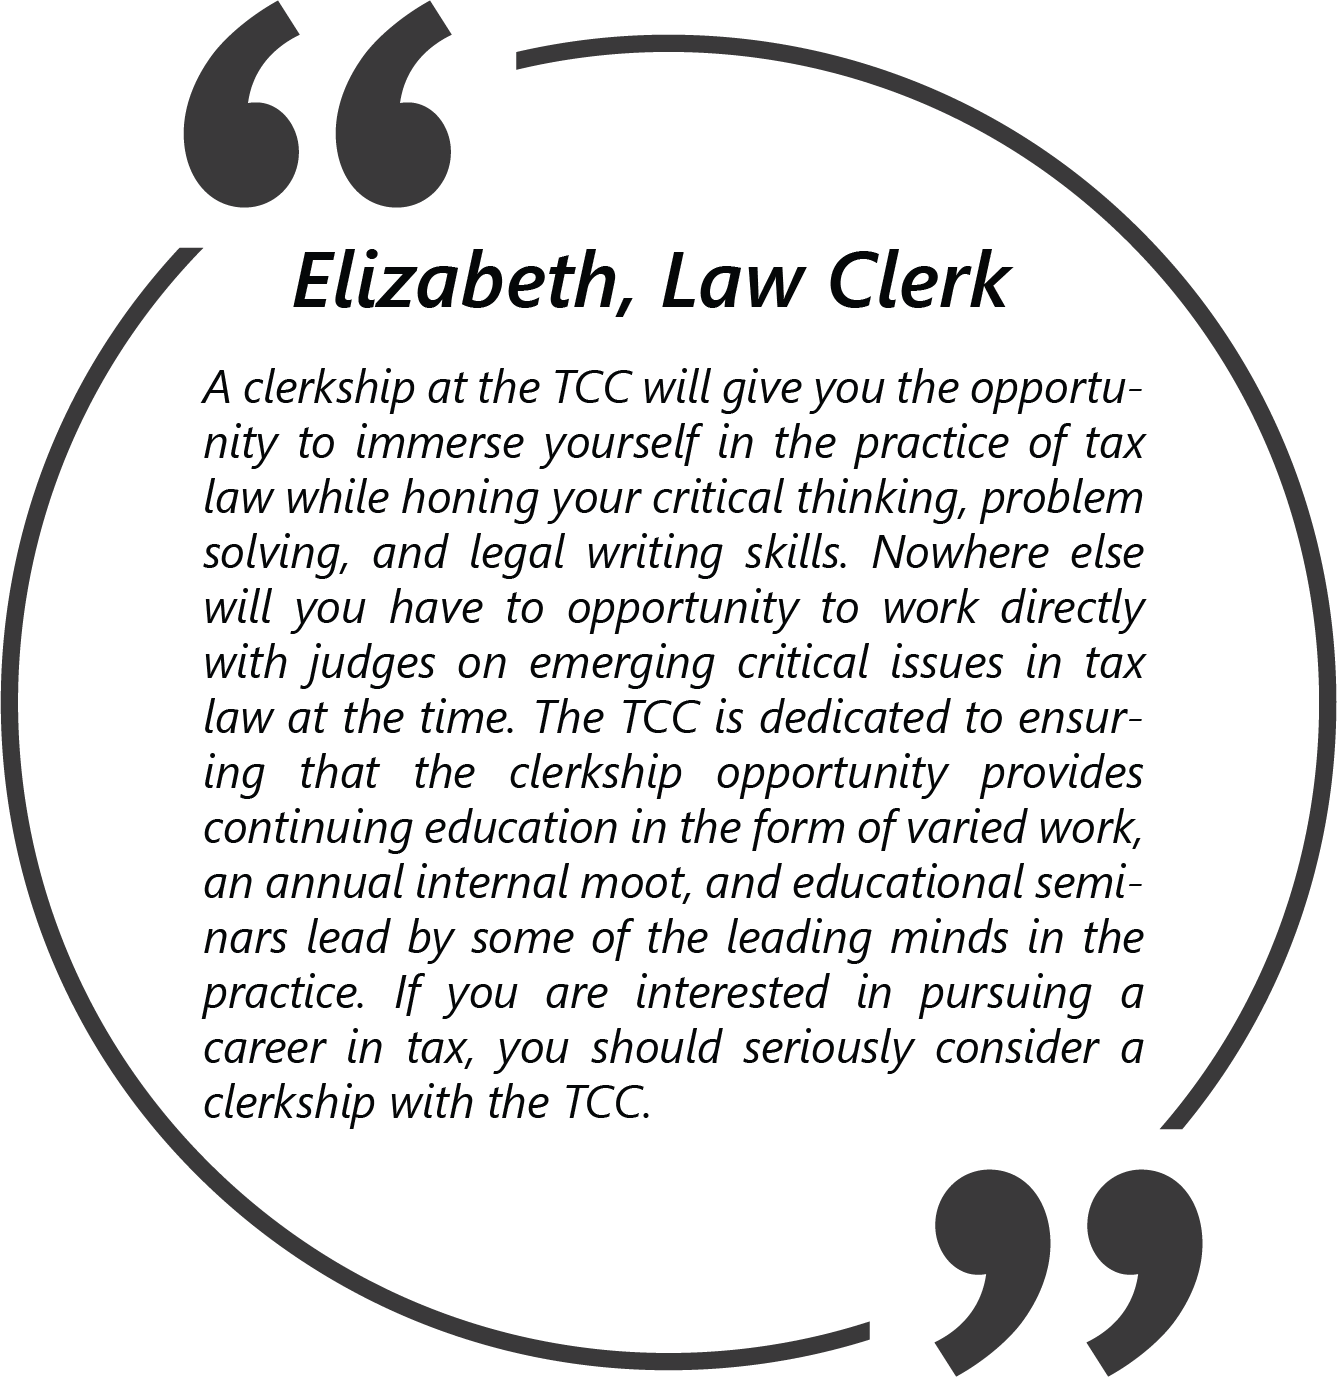 Quote from Elizabeth, Law Clerk